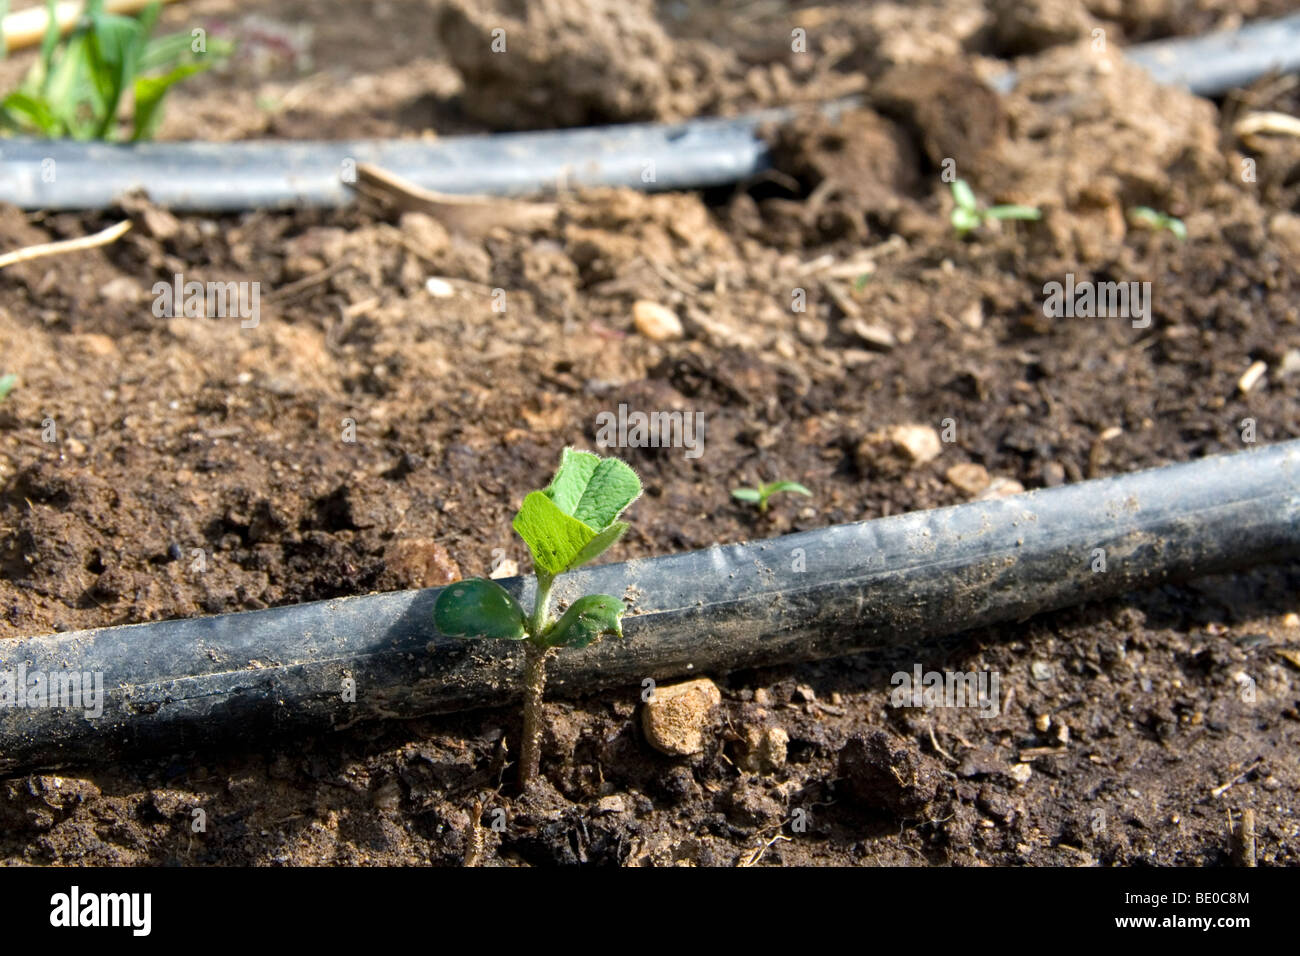 Drip irrigation and a newly sprouted plant in a residential garden, Boise, Idaho, USA. Stock Photo